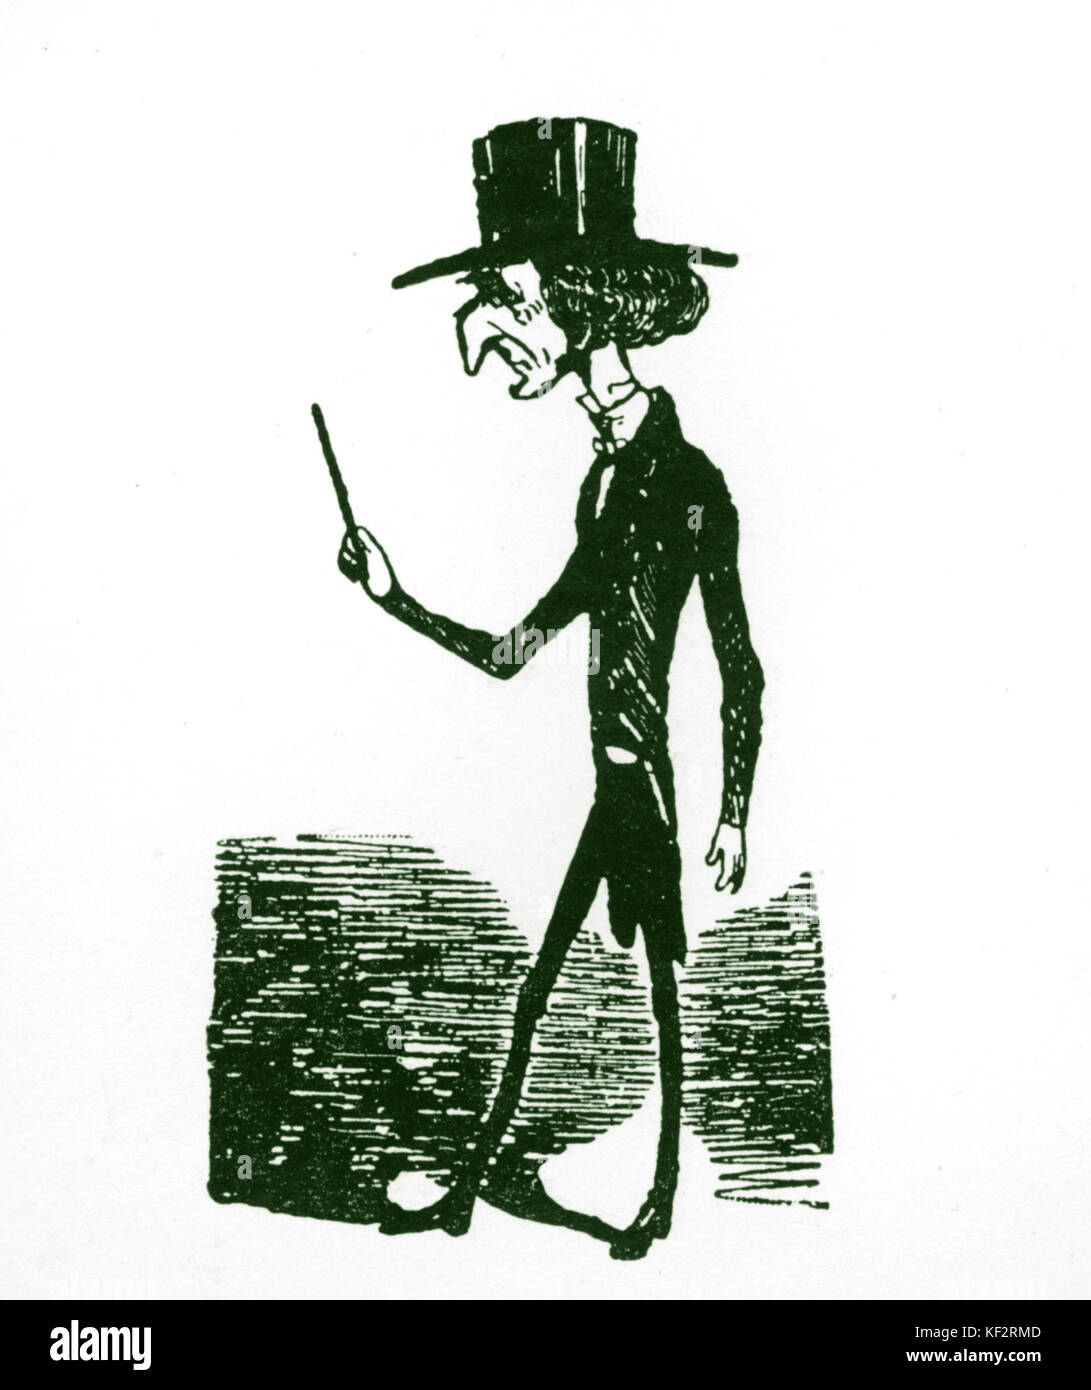 Berlioz caricature by Nadar. French composer (1803-1869). Stock Photo